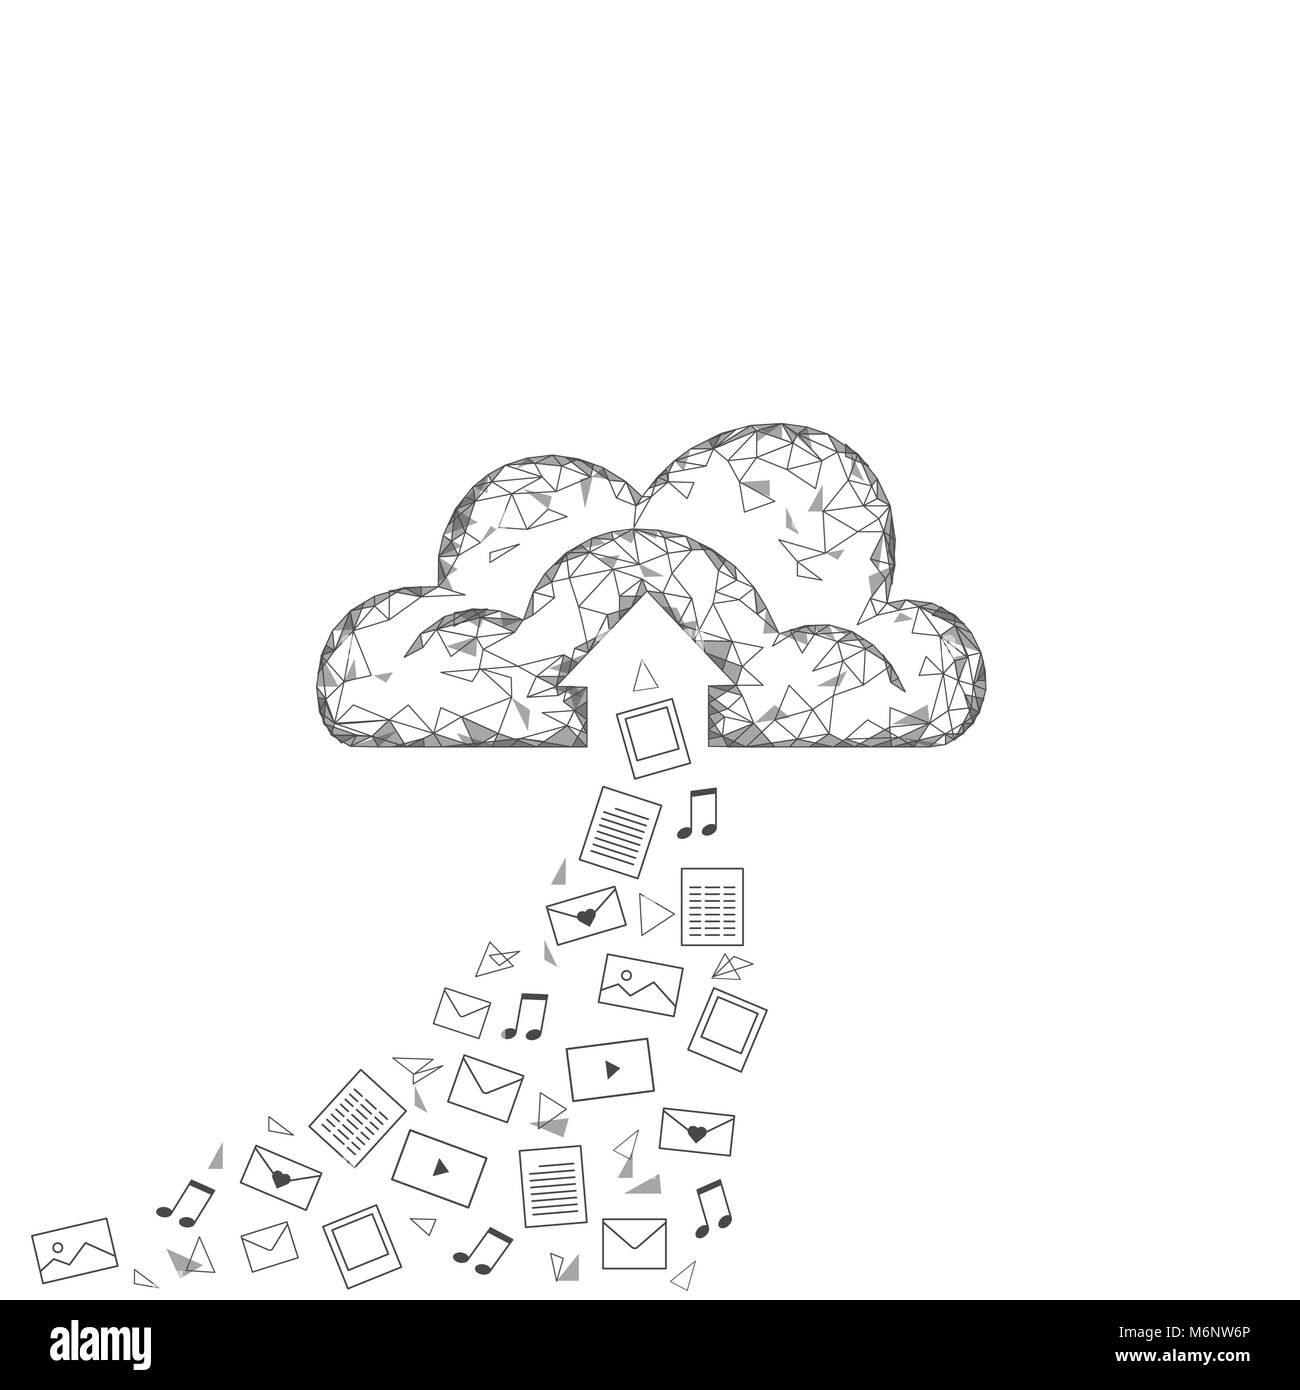 Cloud computing online storage low poly. Polygonal future modern internet business technology. White gray global data information exchange folder file icon Stock Vector